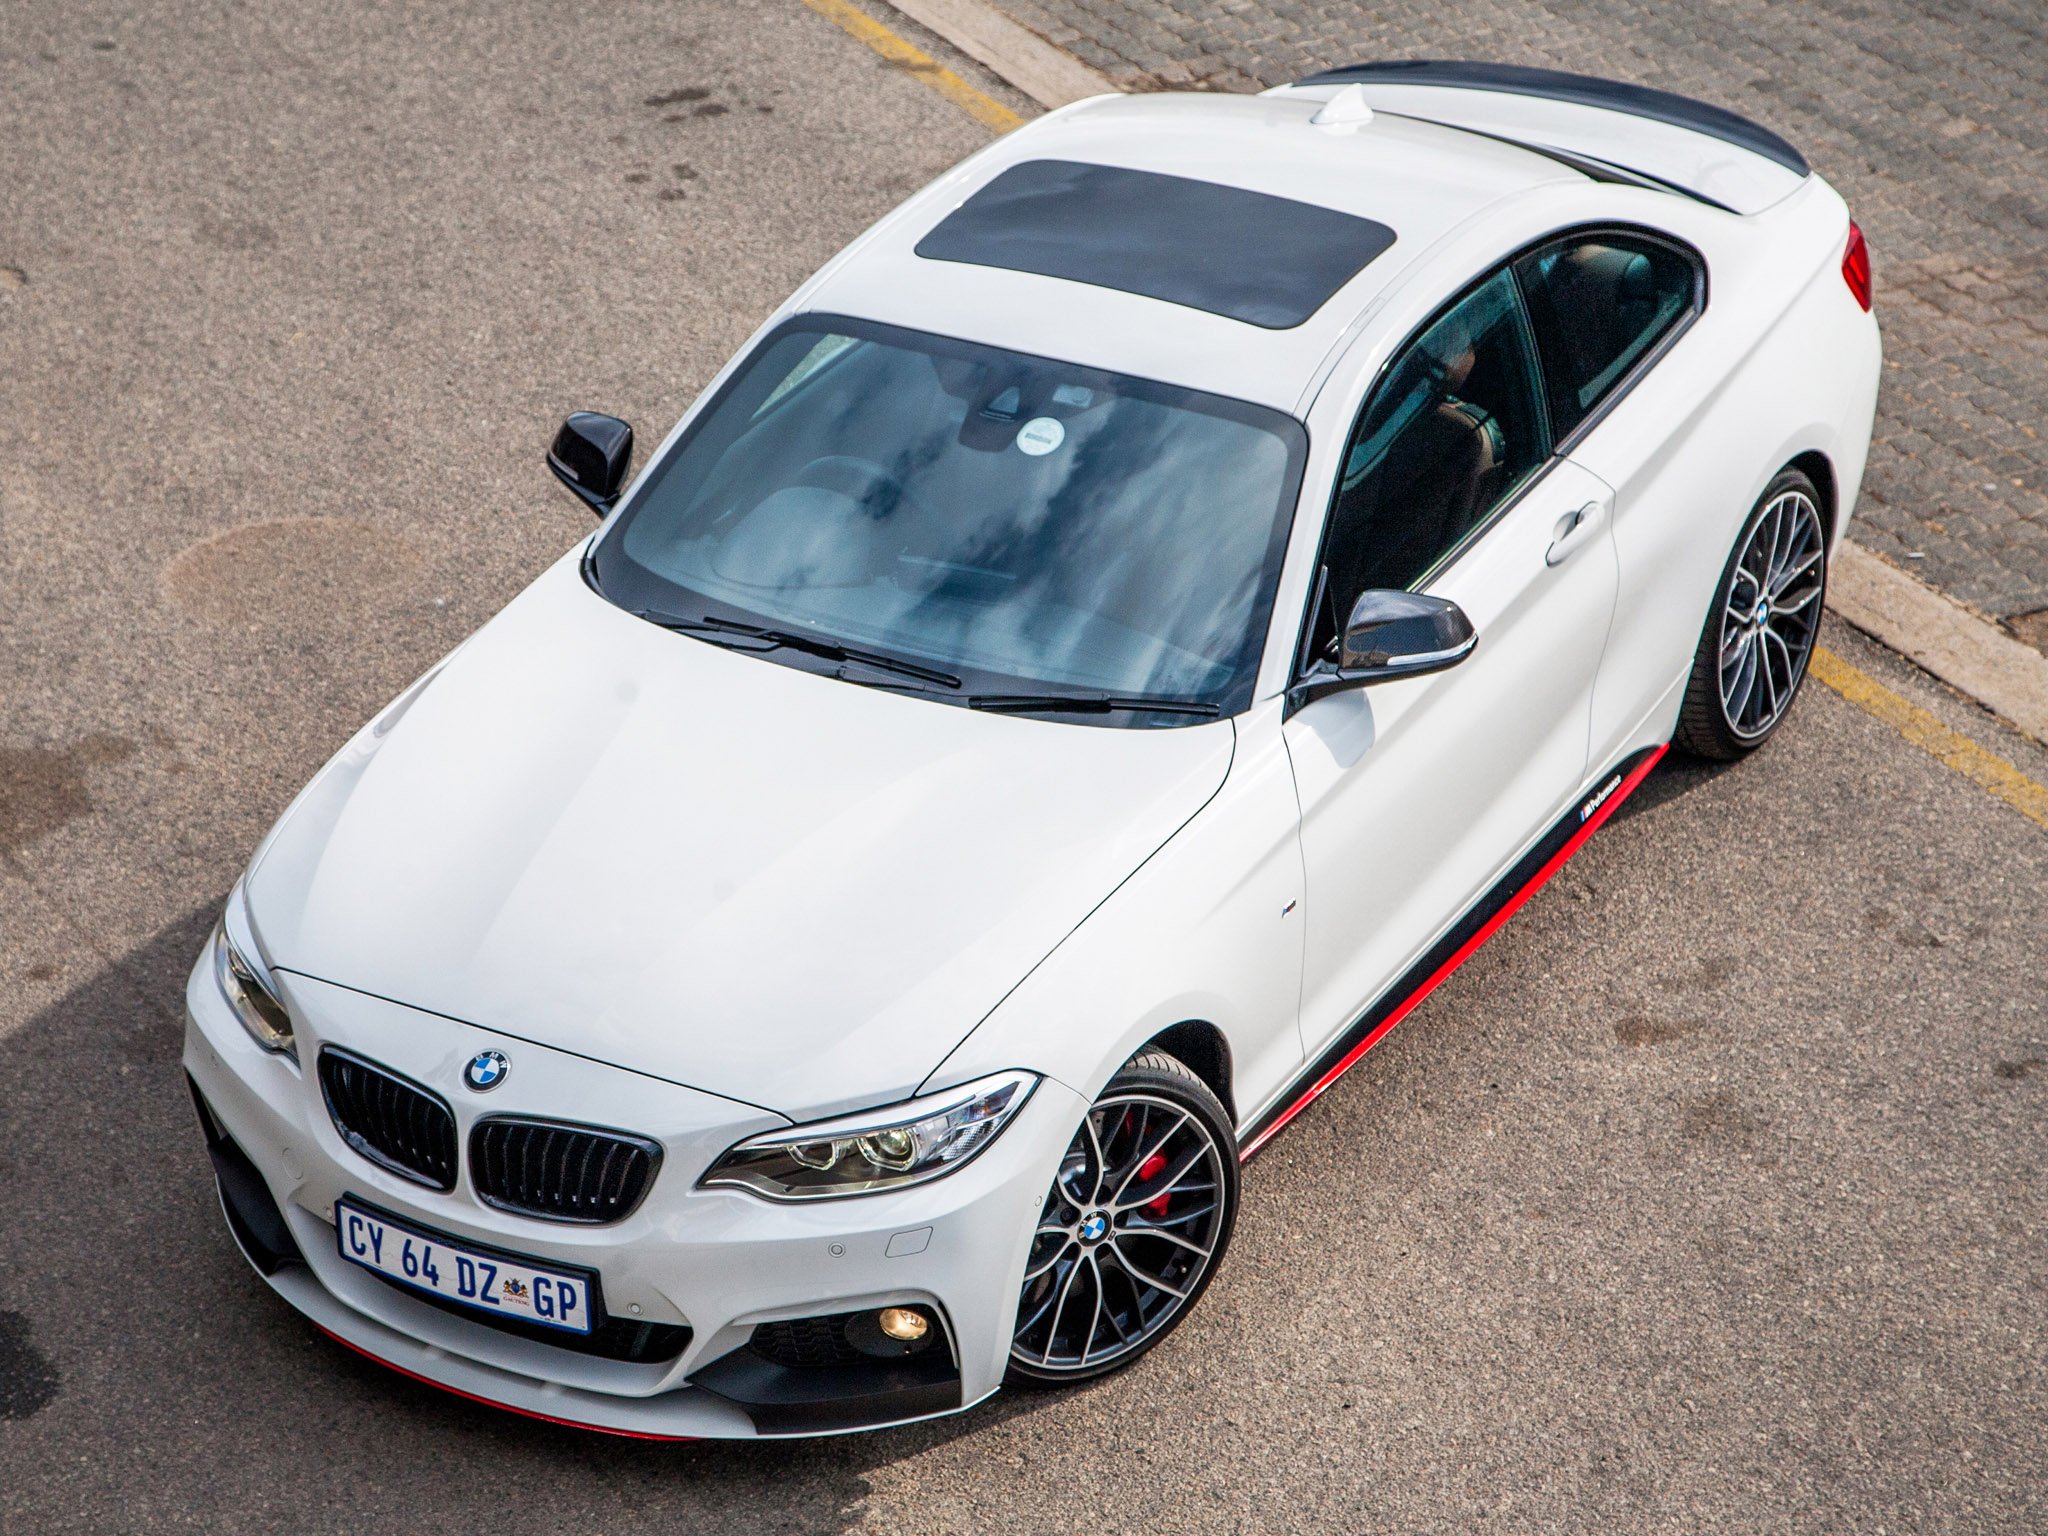 bmw, 2 series, M220d, Coupe, M performance, Accessories, F22, 2014 Wallpaper